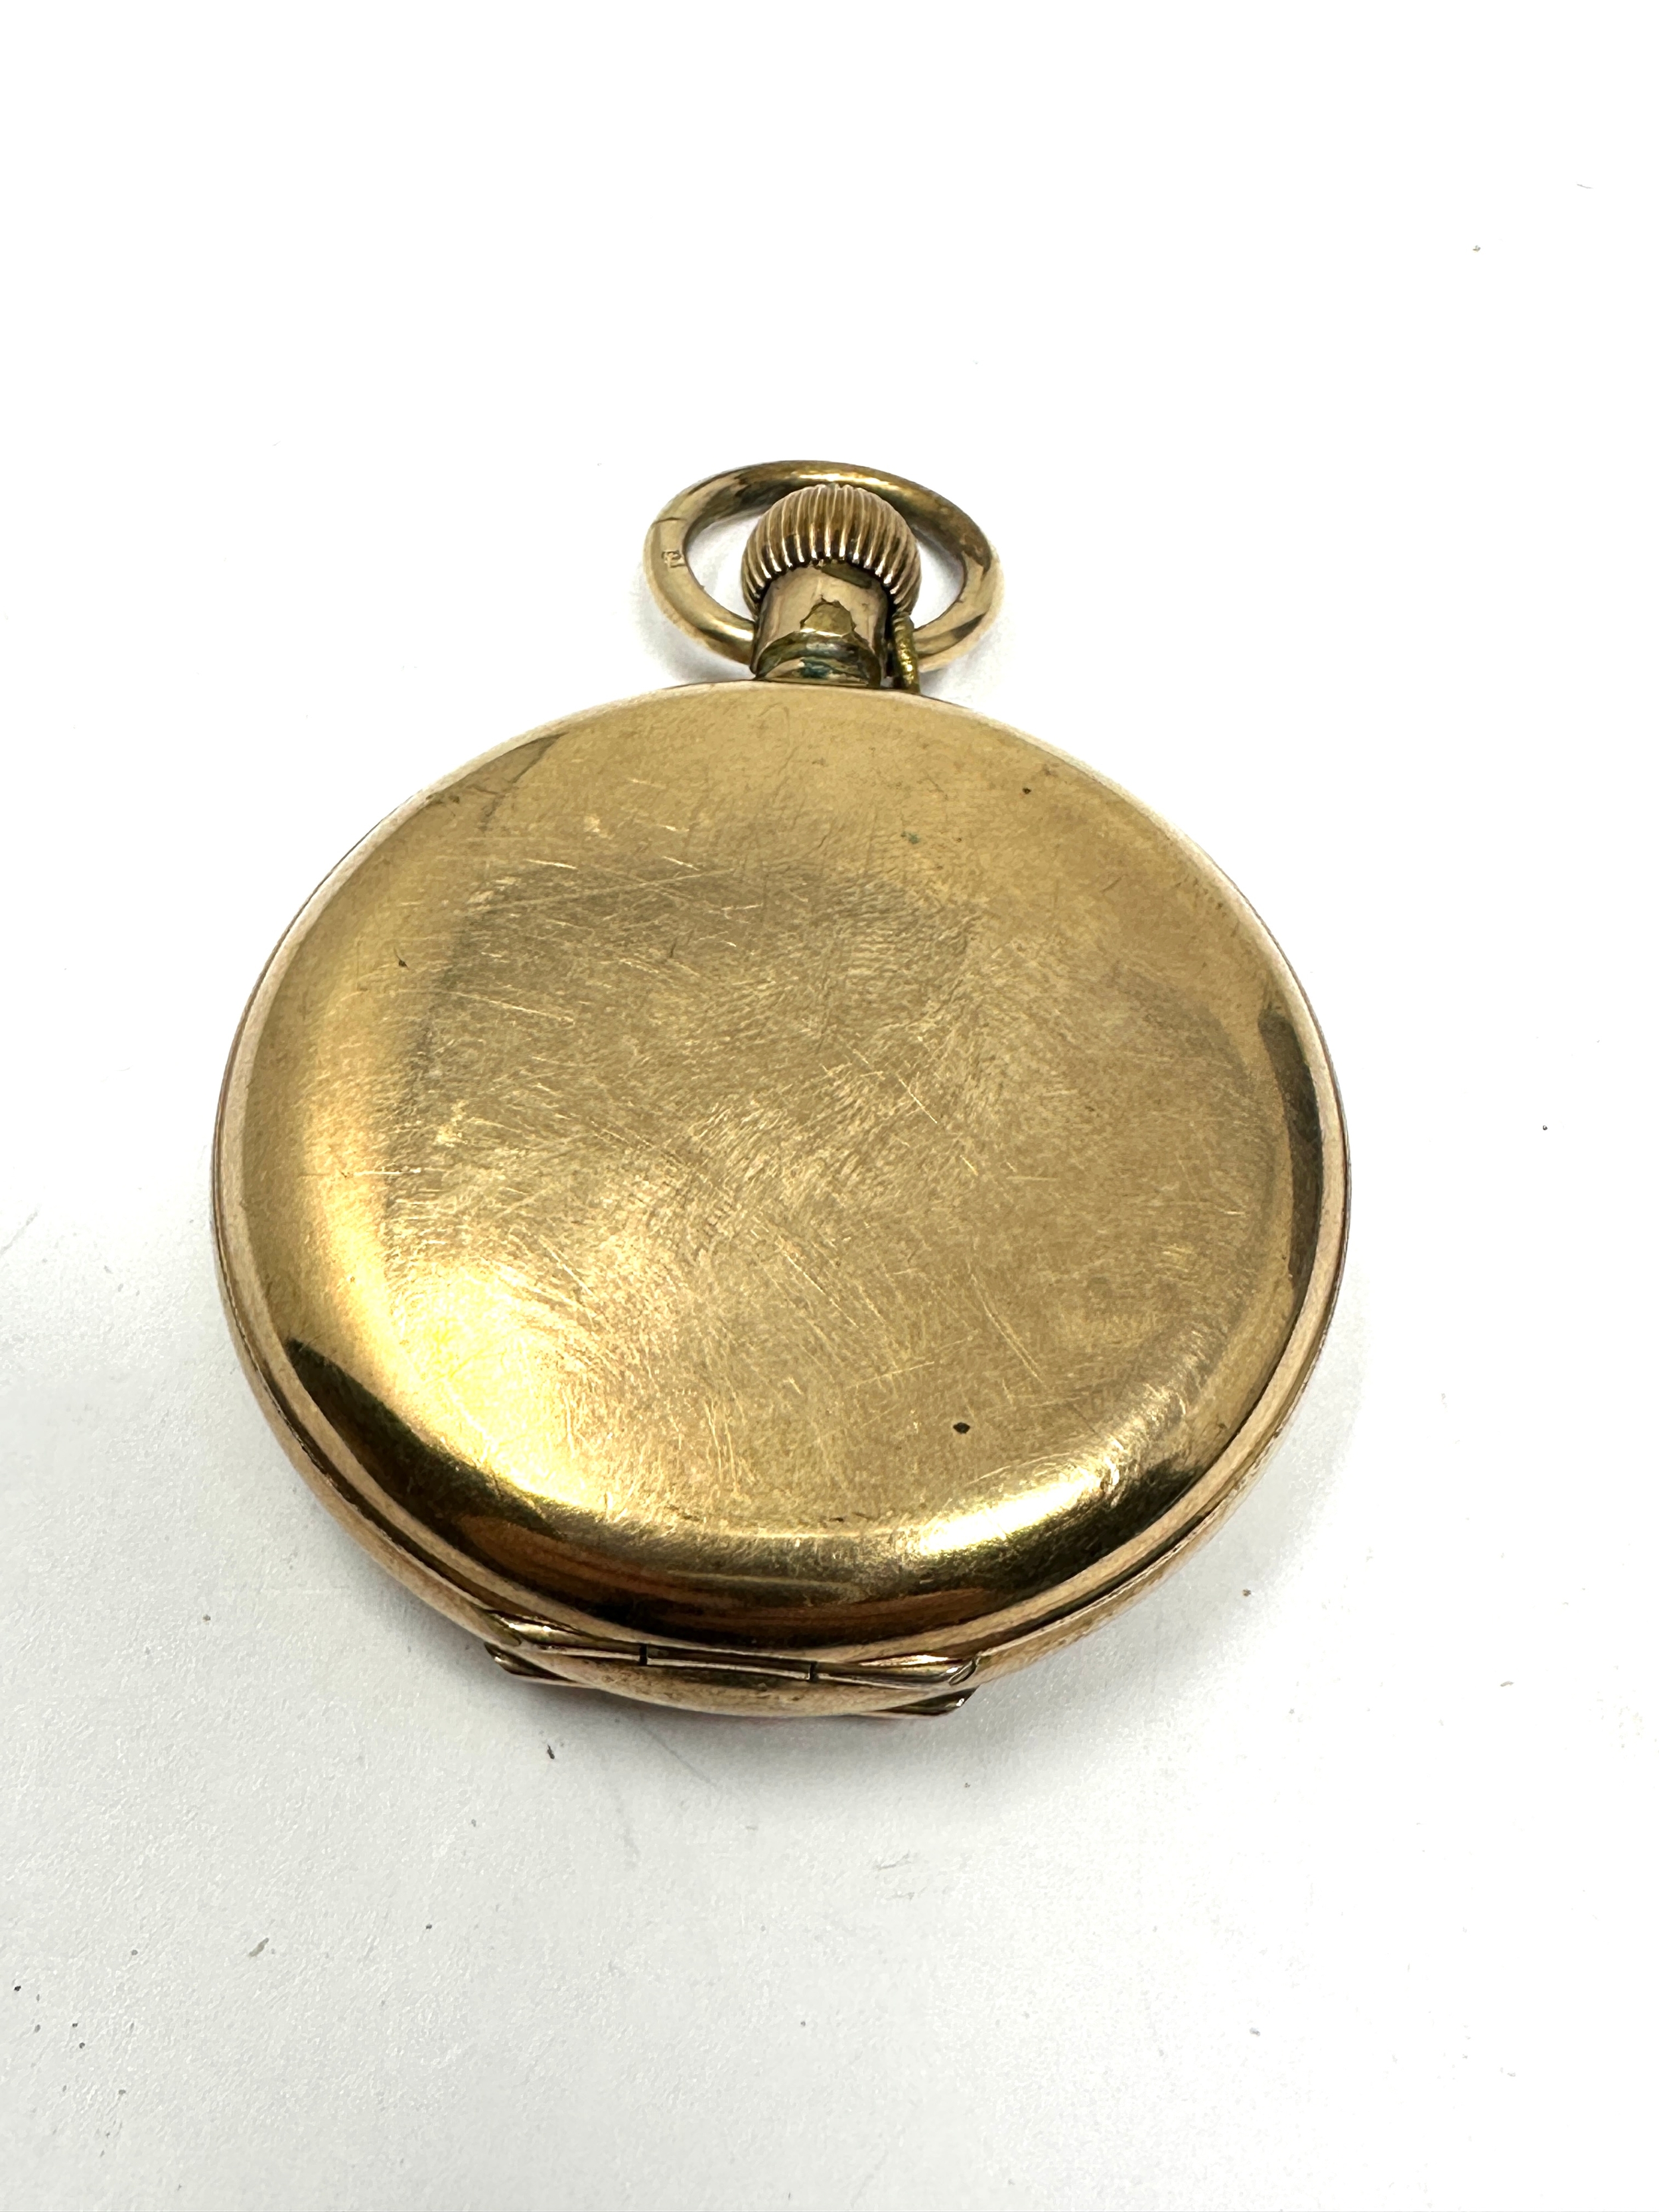 gold plate full hunter tho russell pocket watch the watch is ticking - Image 2 of 3